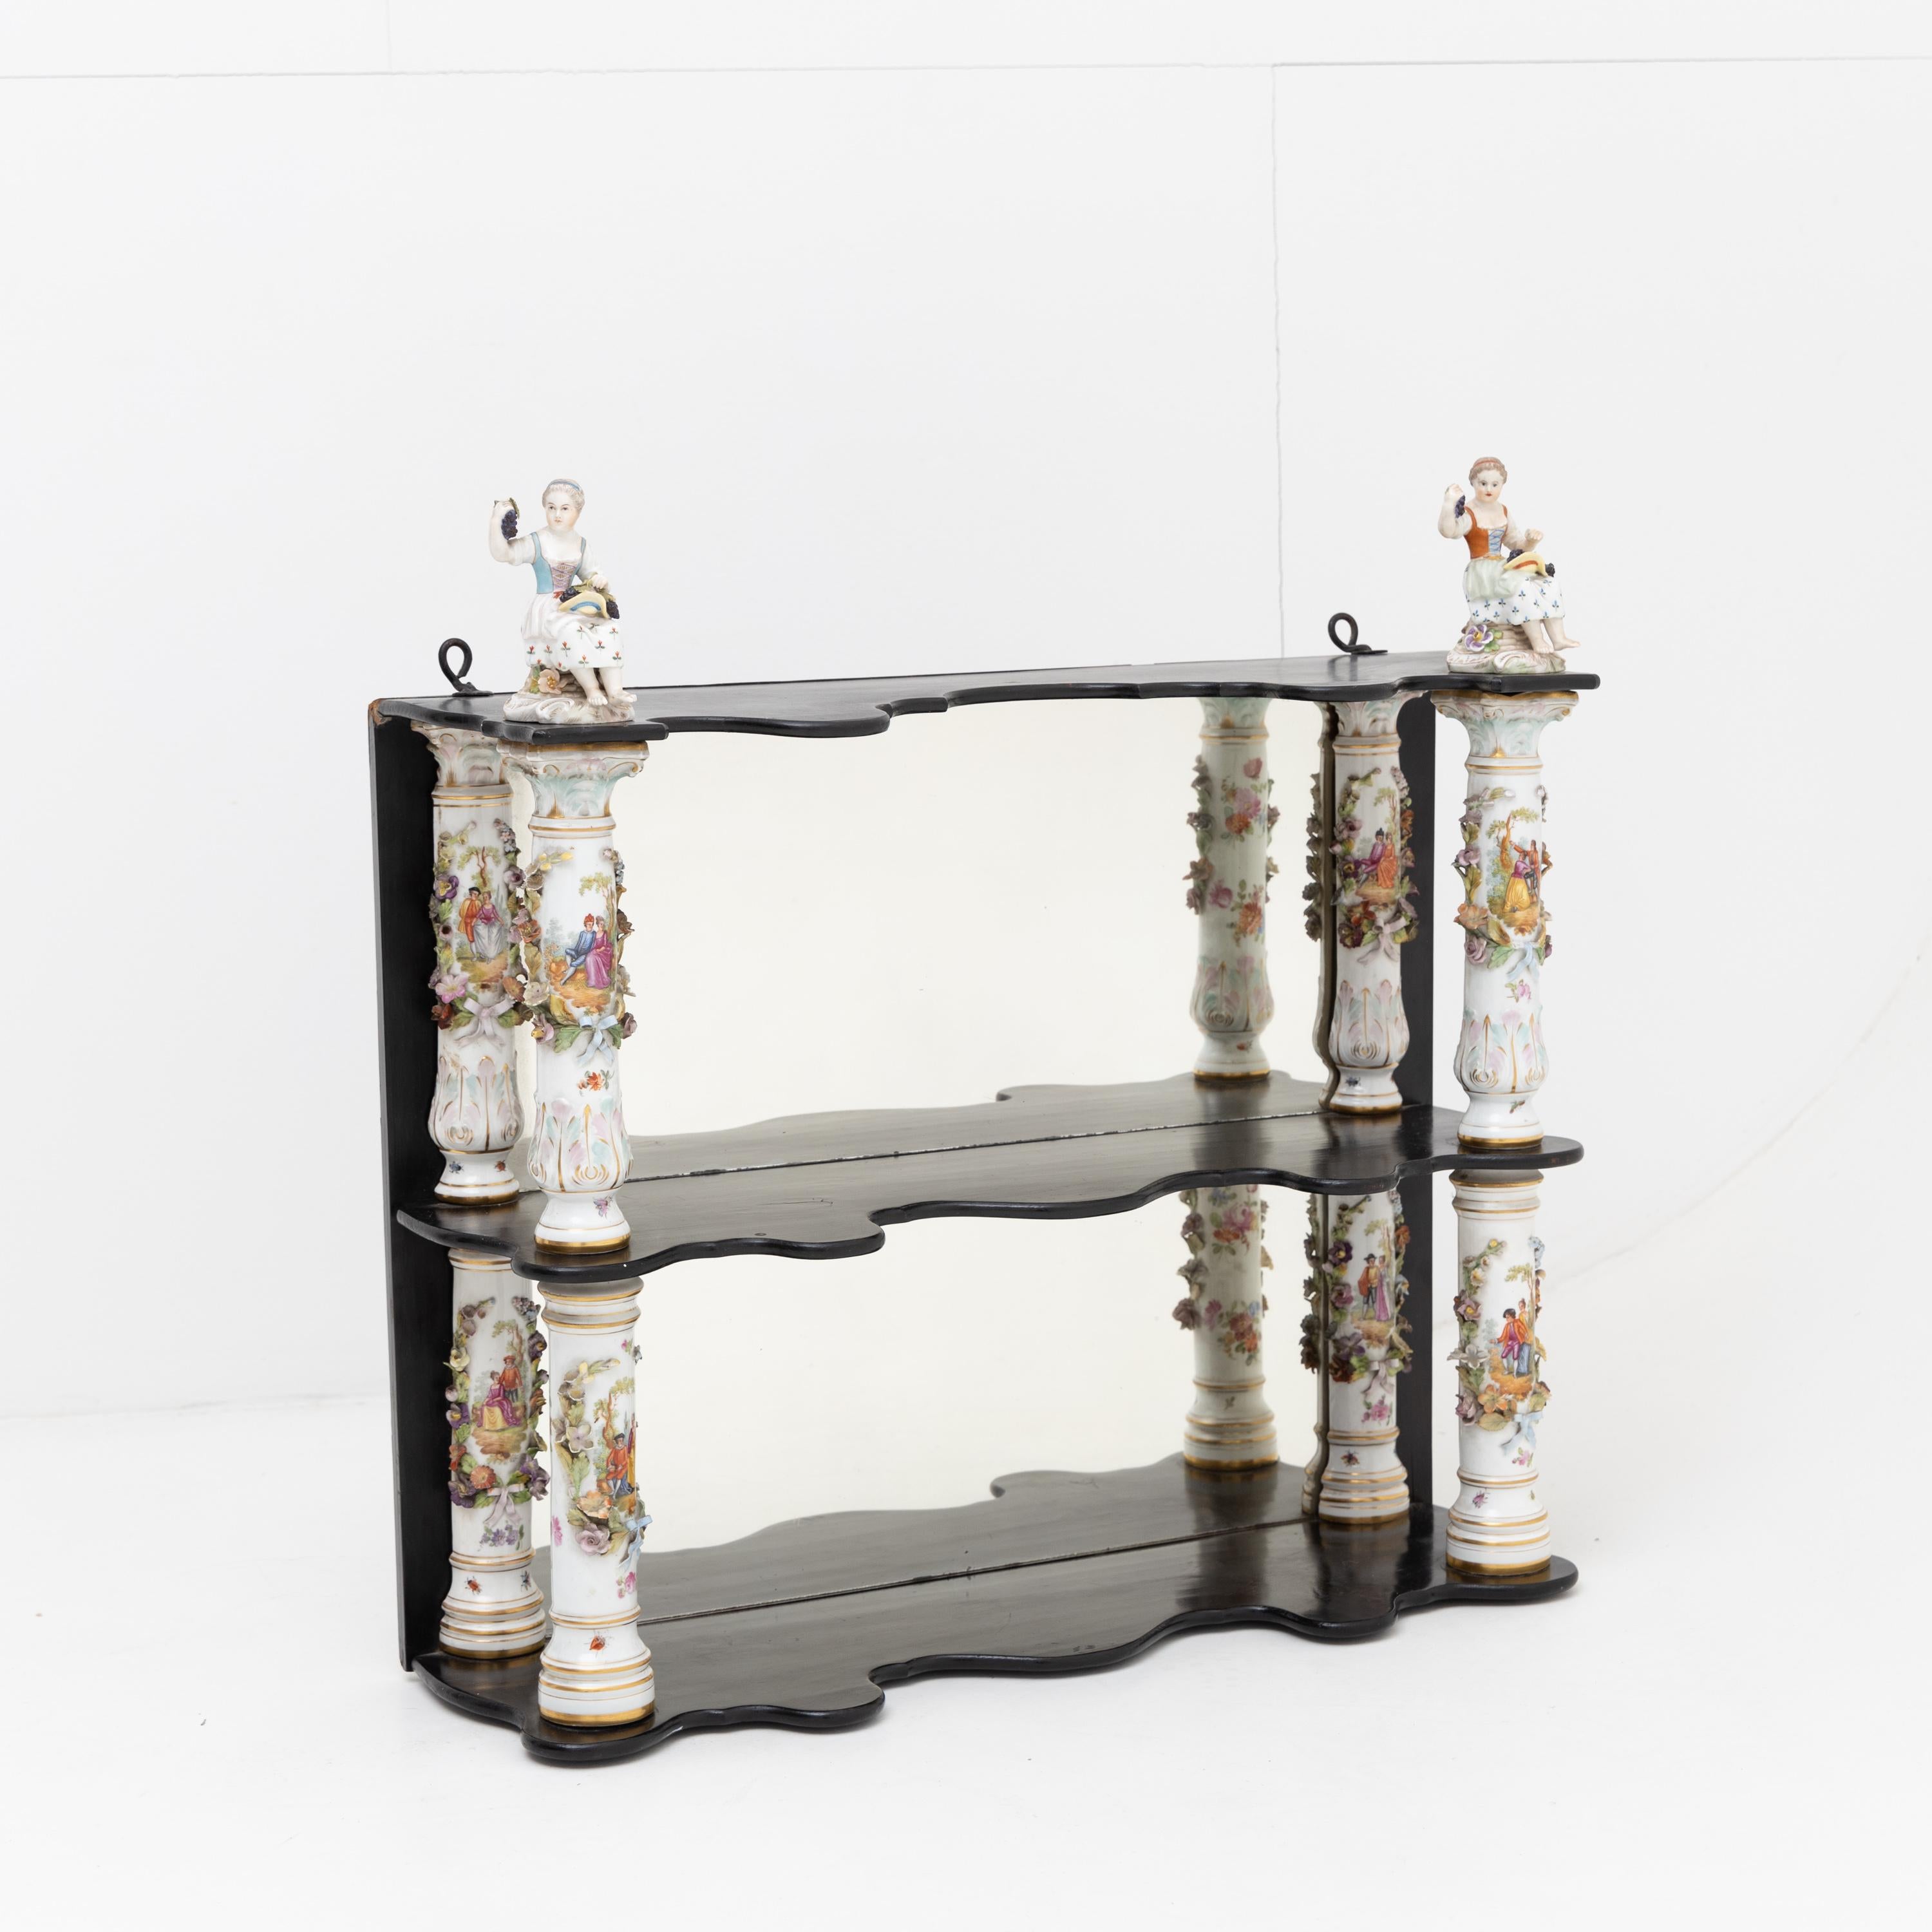 Small, ebonized wall shelf with polychrome porcelain columns and applied floral decoration and gallant figural scenes. The shelves are wavy, and the rear wall is mirrored. Small figurines of two girls with grapes sit on top of the shelf; marked Carl